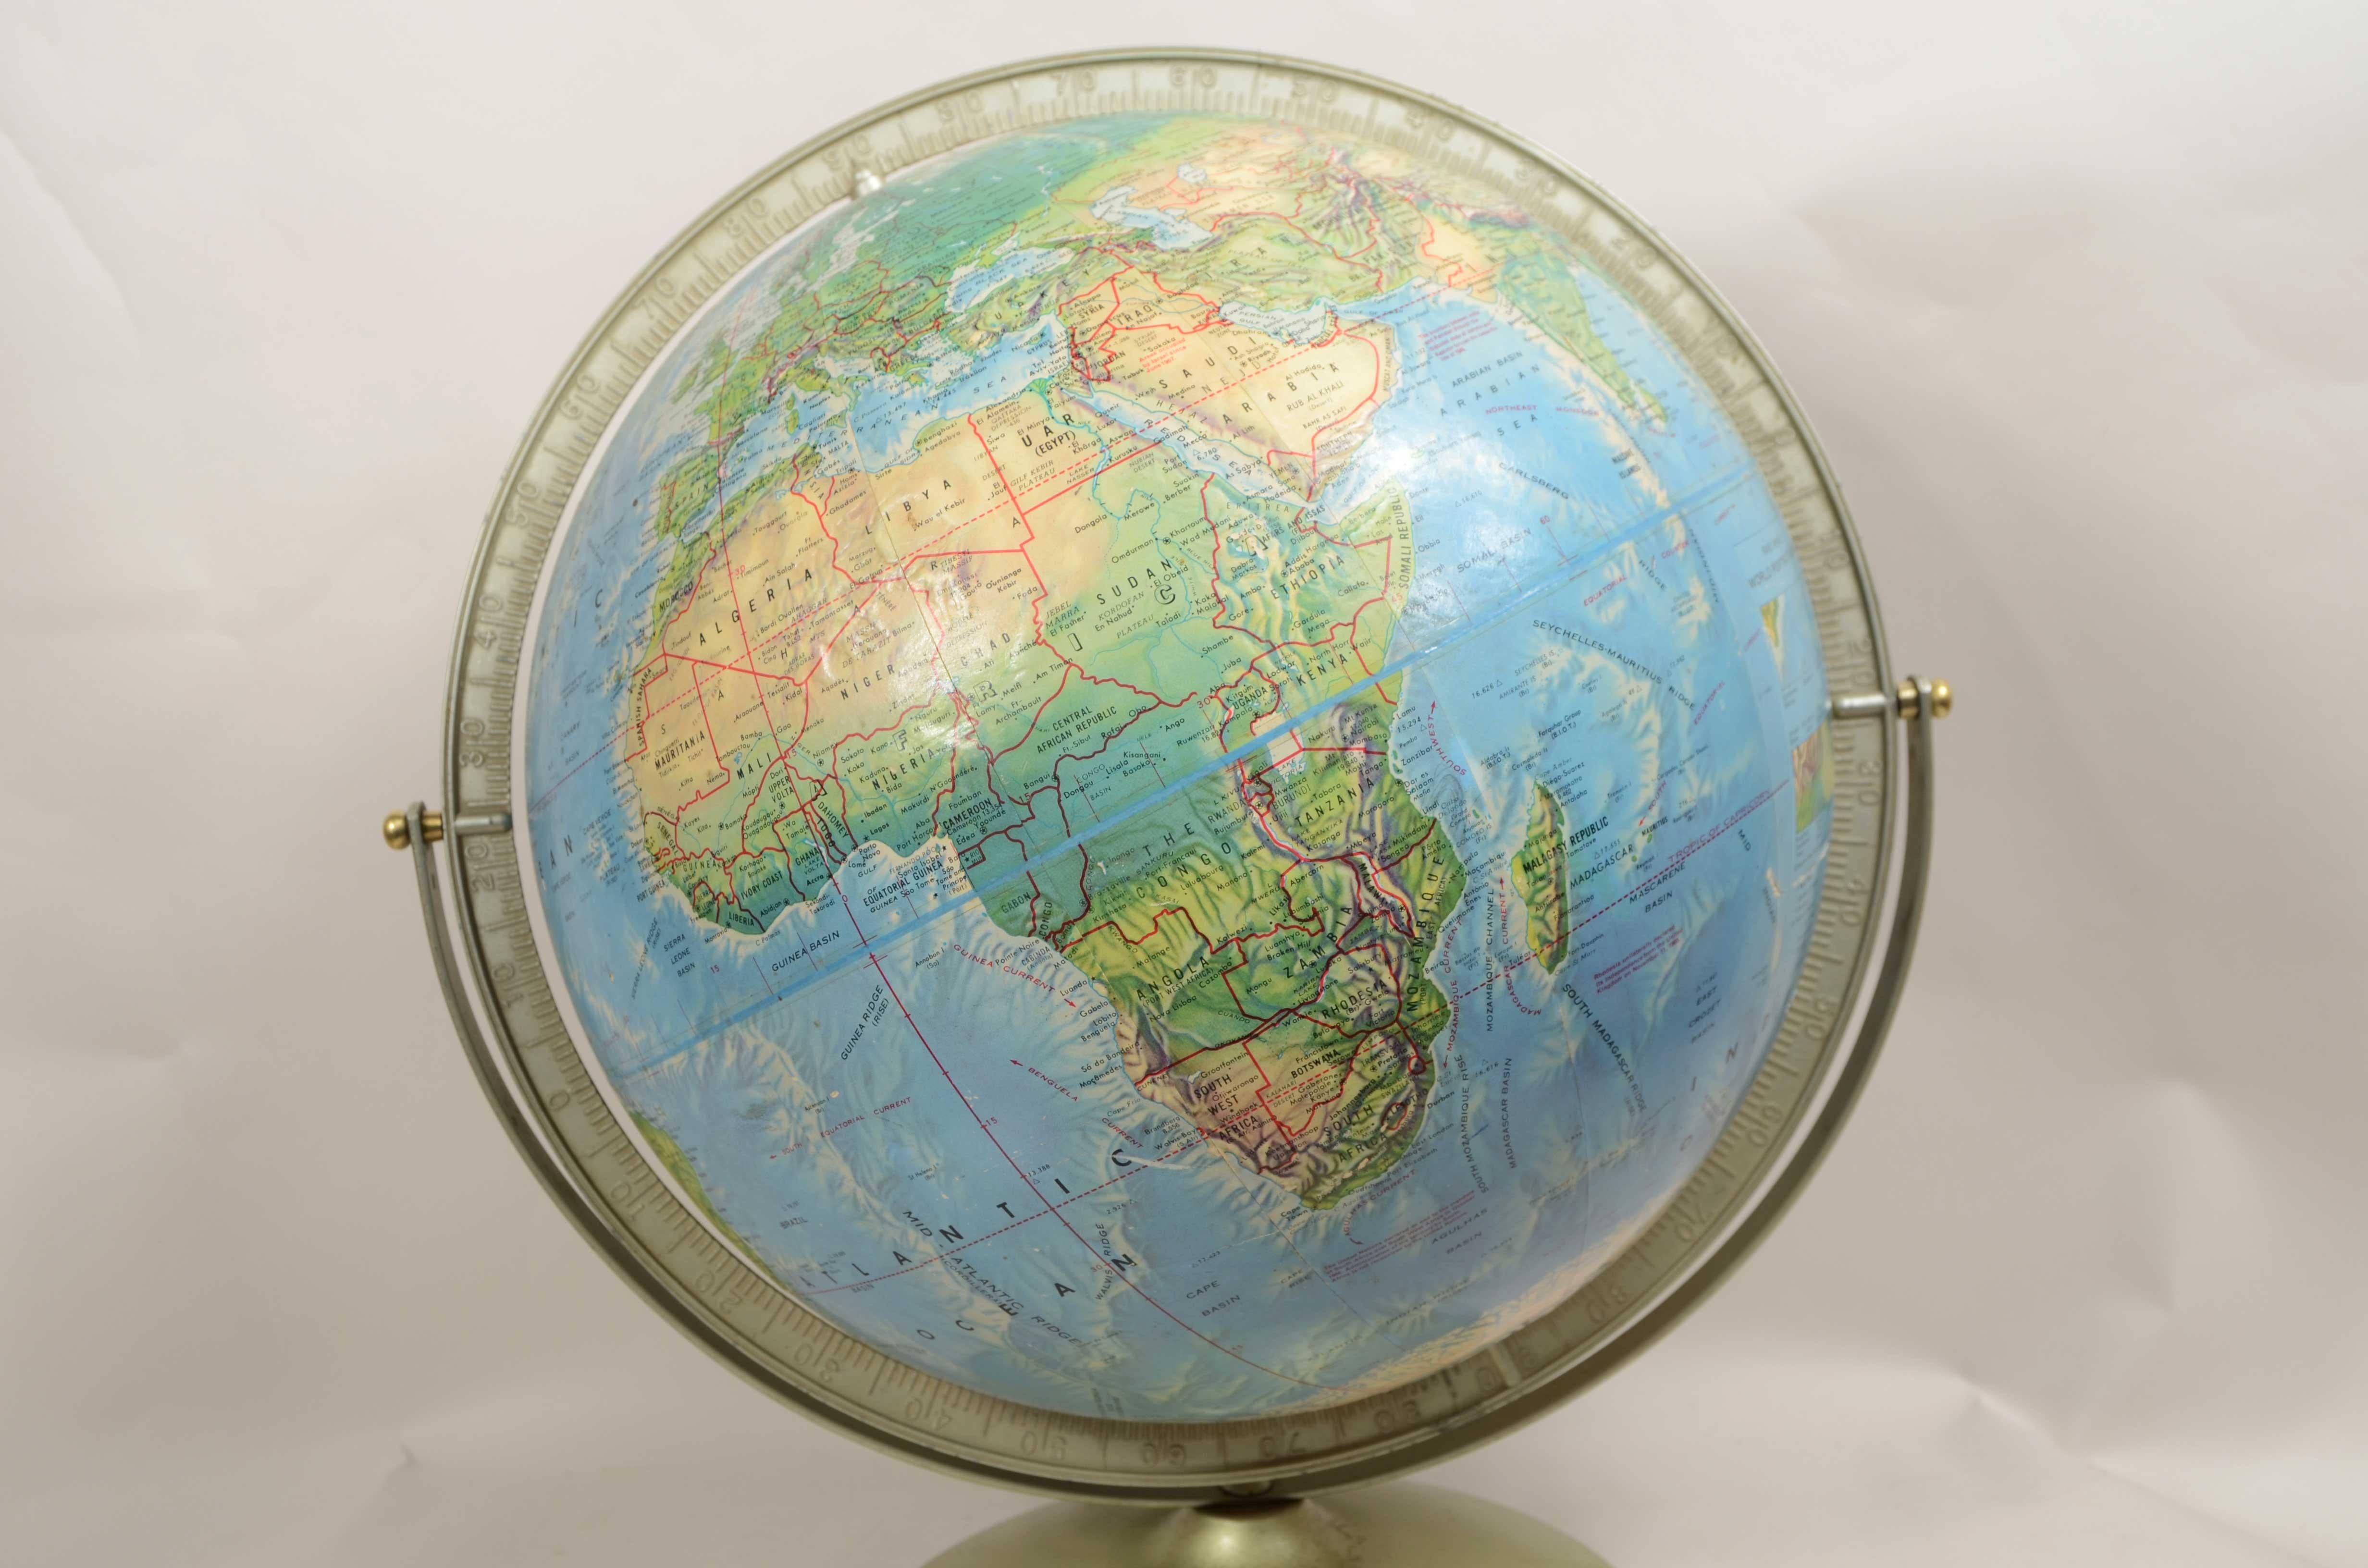 Tabletop political globe, published in the 1960s by Rand McNally. Embossed papier-mâché ball, base and rim complete with the graduated metal merian. 
Good condition, very good readability. Height cm 43 - 16.9 inches, sphere diameter cm 30 - 11.8